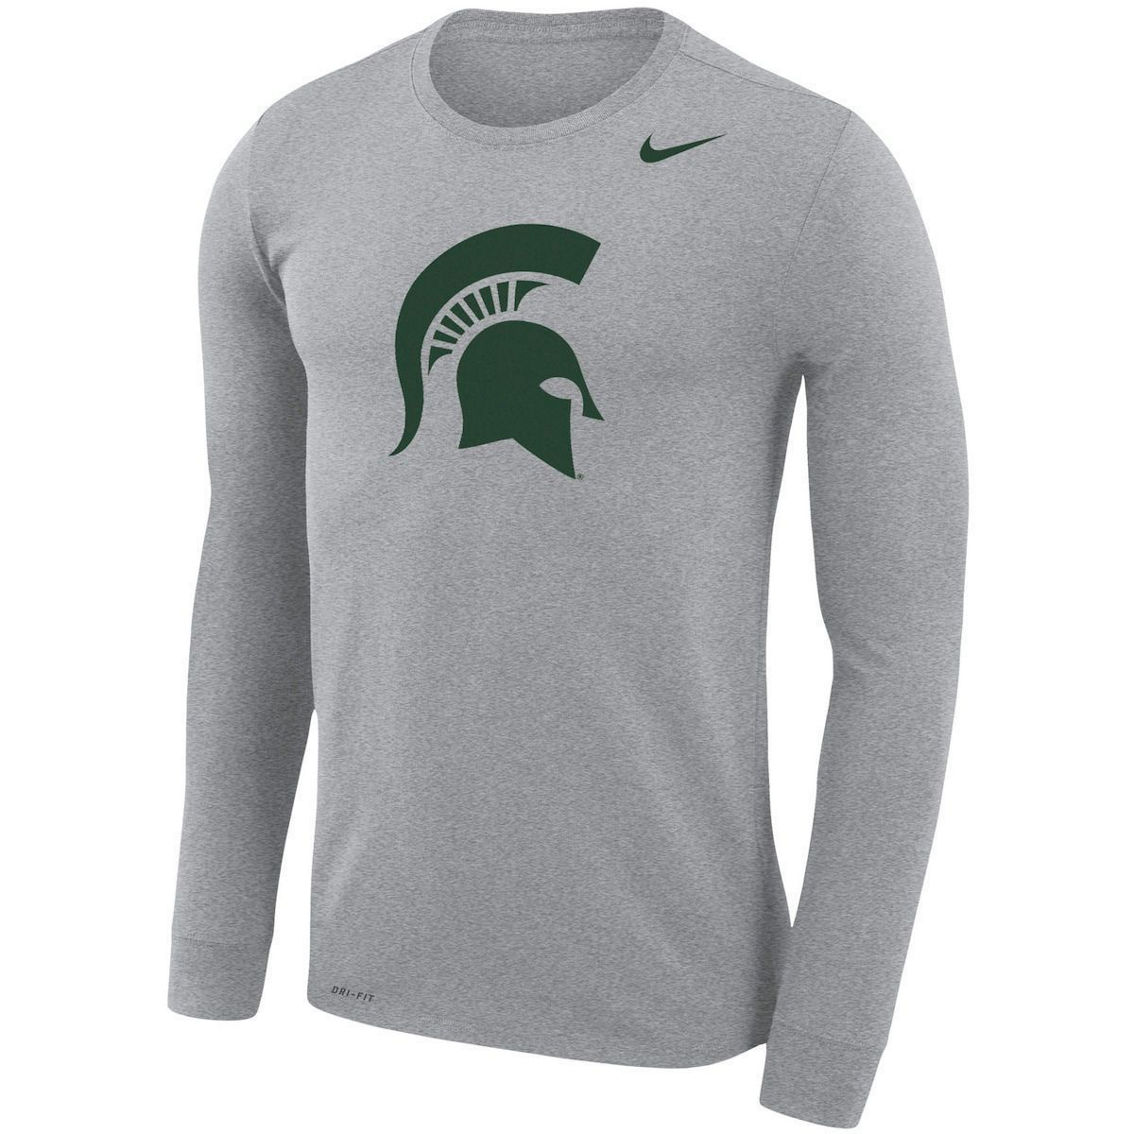 Nike Men's Heather Gray Michigan State Spartans Legend Wordmark Performance Long Sleeve T-Shirt - Image 3 of 4